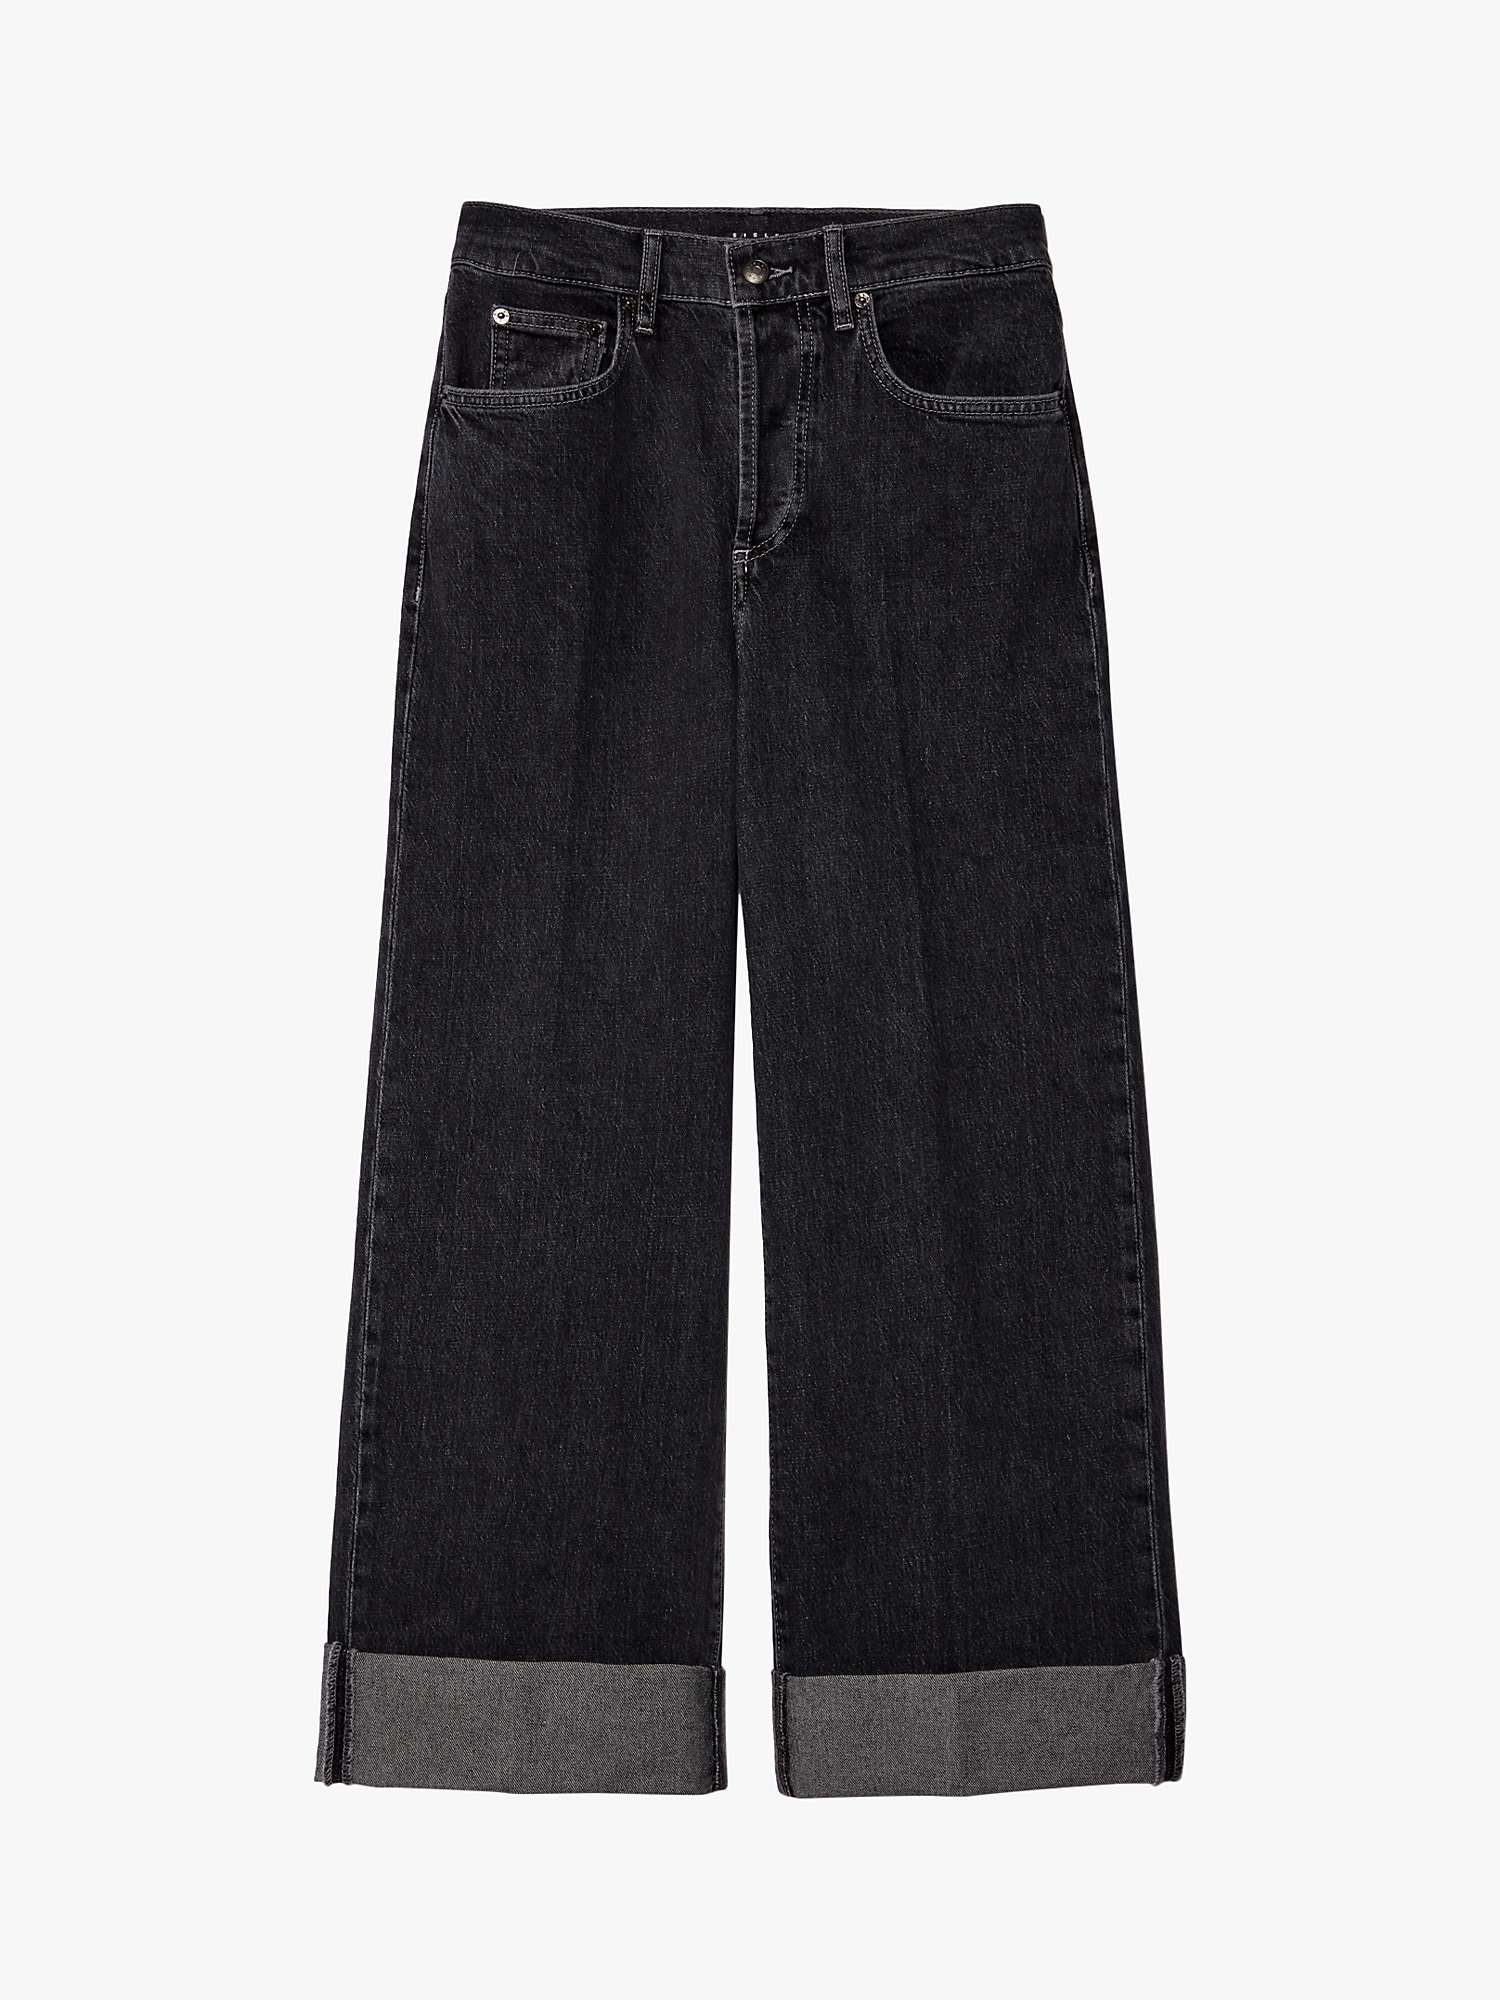 Buy SISLEY Baggy Fit Cuff Jeans, Black Online at johnlewis.com